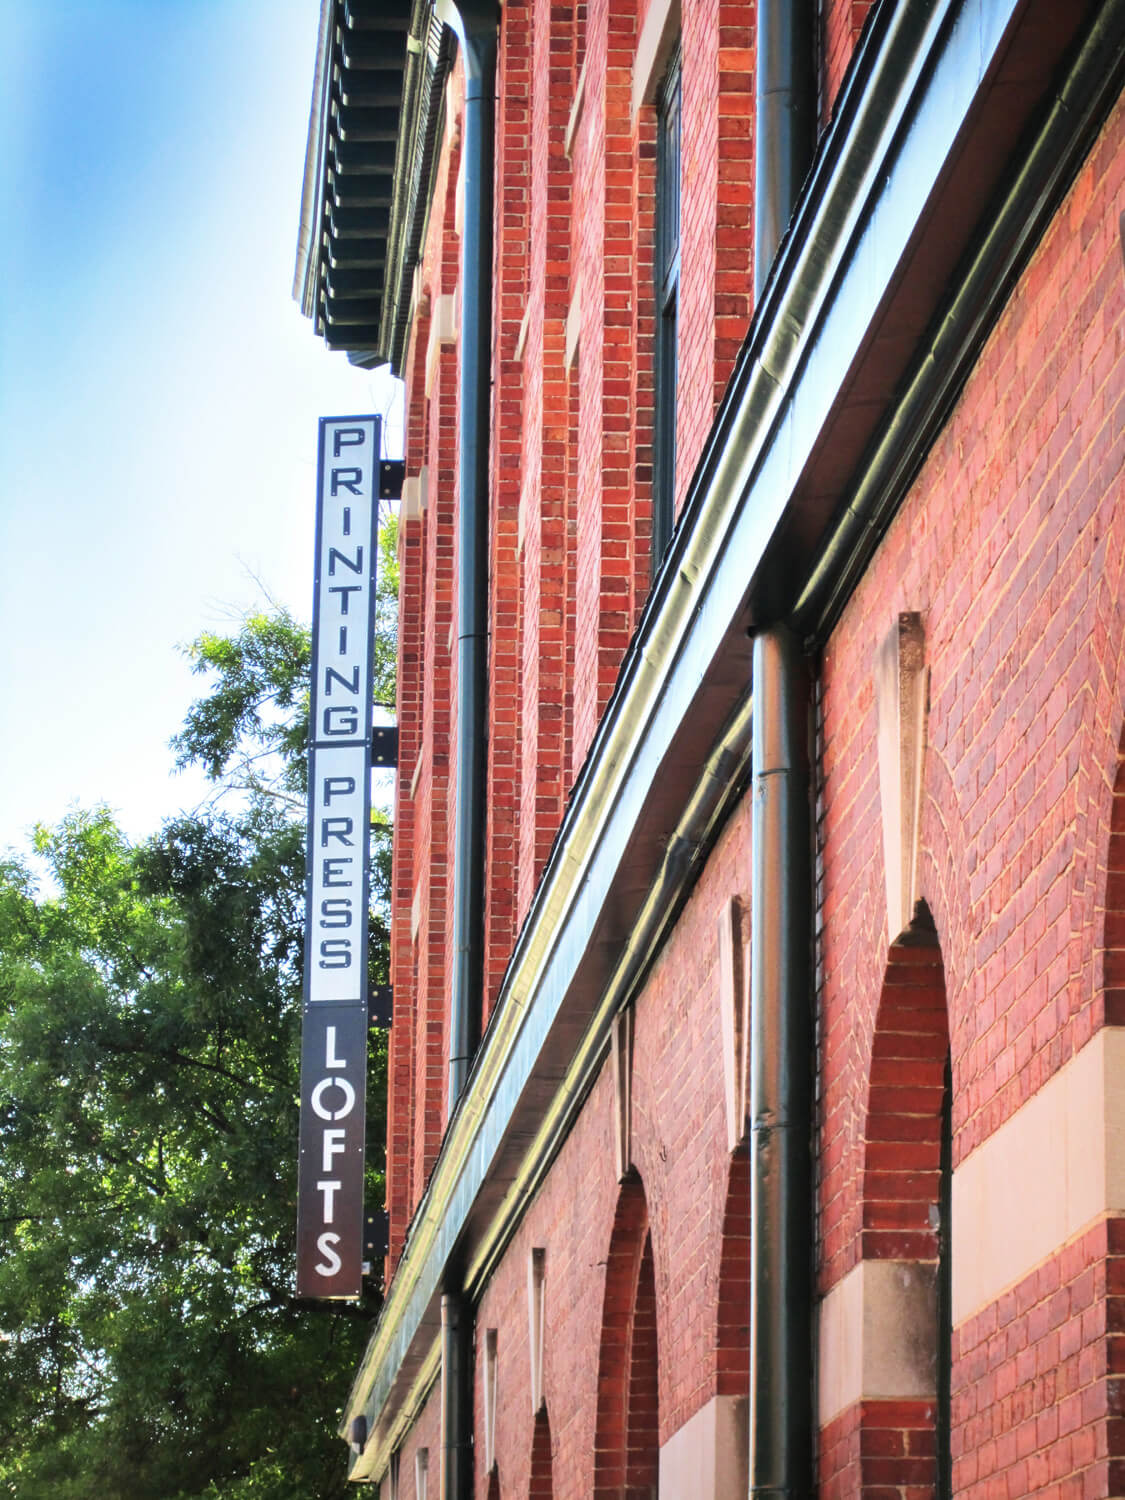 Printing Press Lofts Designed by Foshee Architecture – Exterior Blade Sign